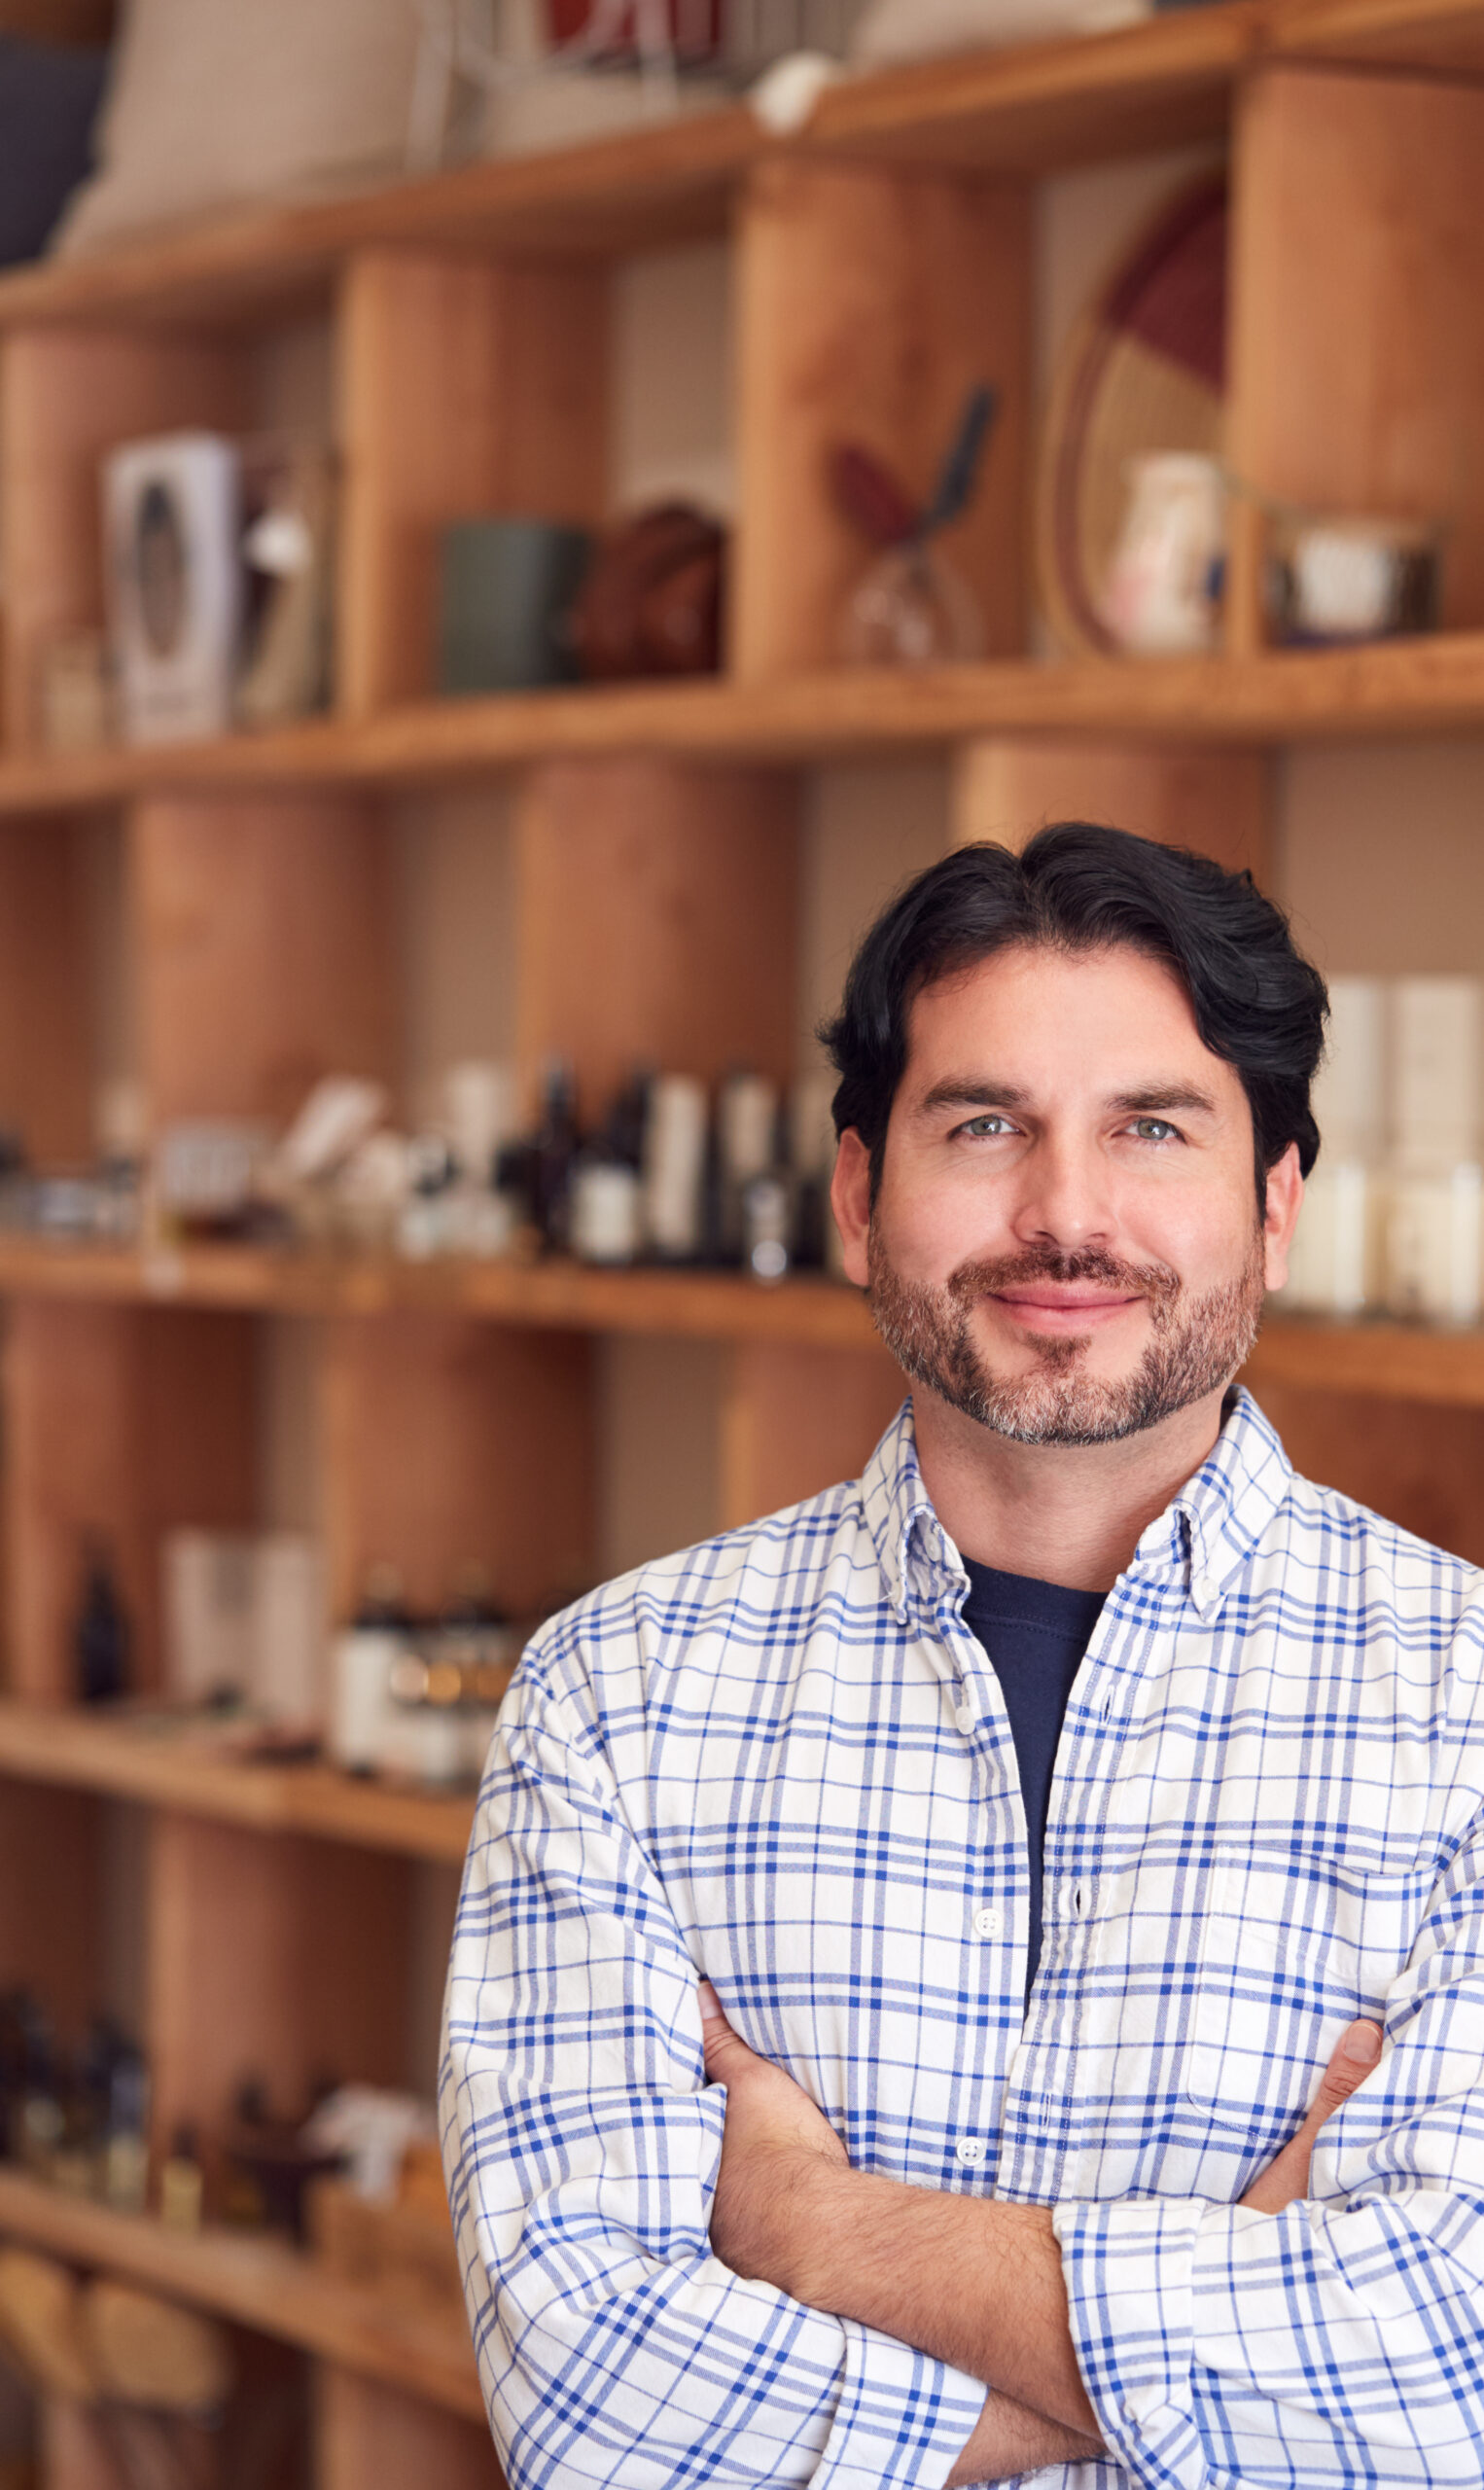 Portrait Of Male Owner Of Gift Store Standing In Front Of Shelves With Cosmetics And Candles